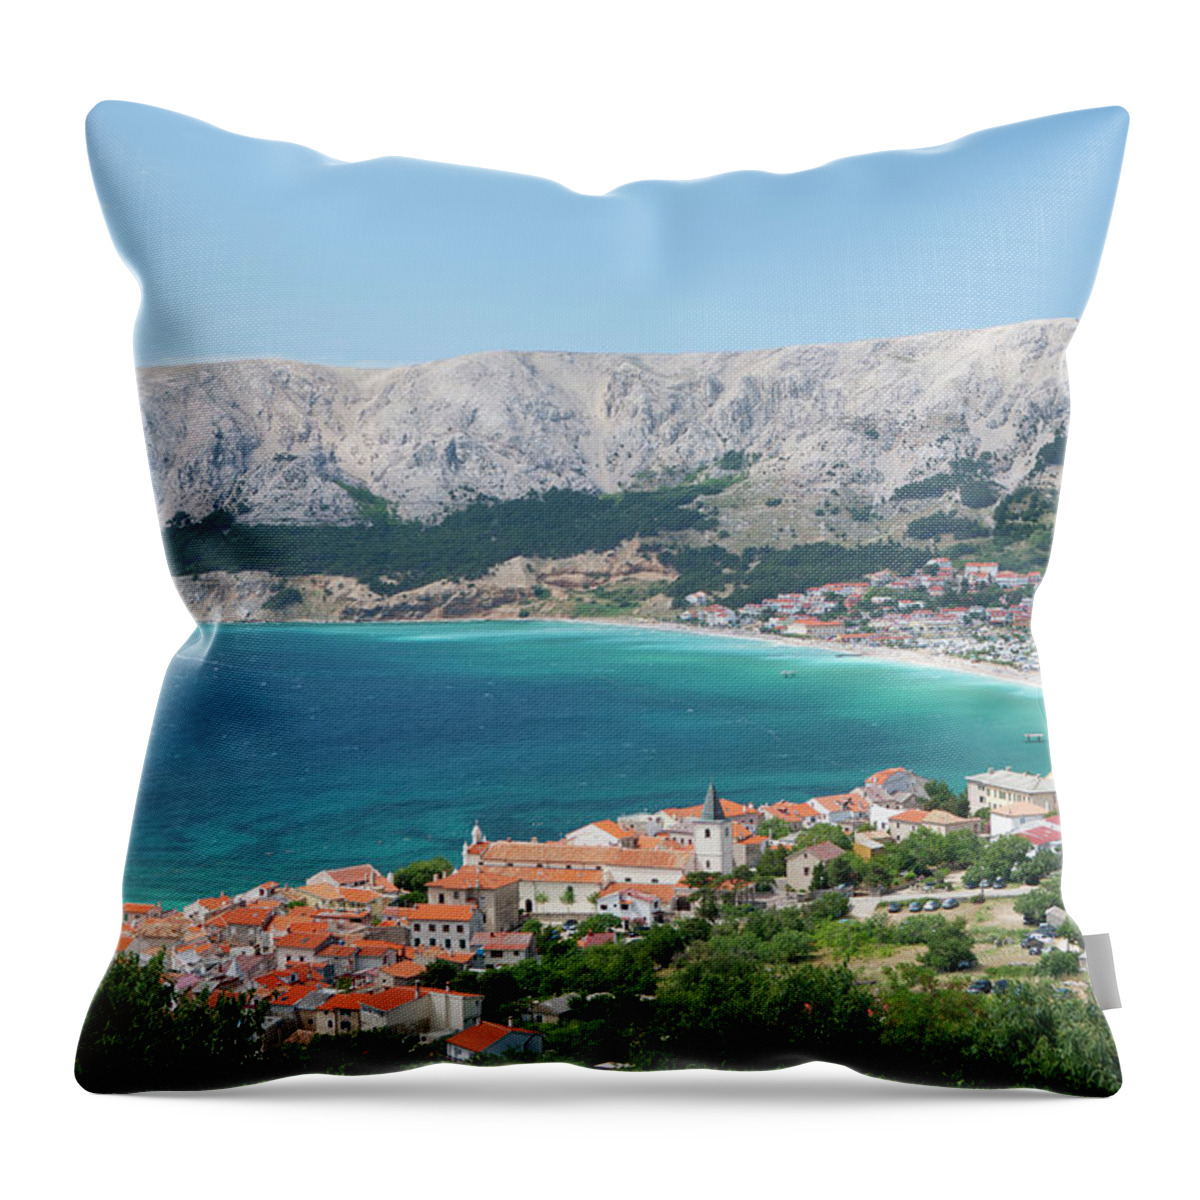 Adriatic Sea Throw Pillow featuring the photograph Croatia, View Of Krk Island And Baska by Westend61